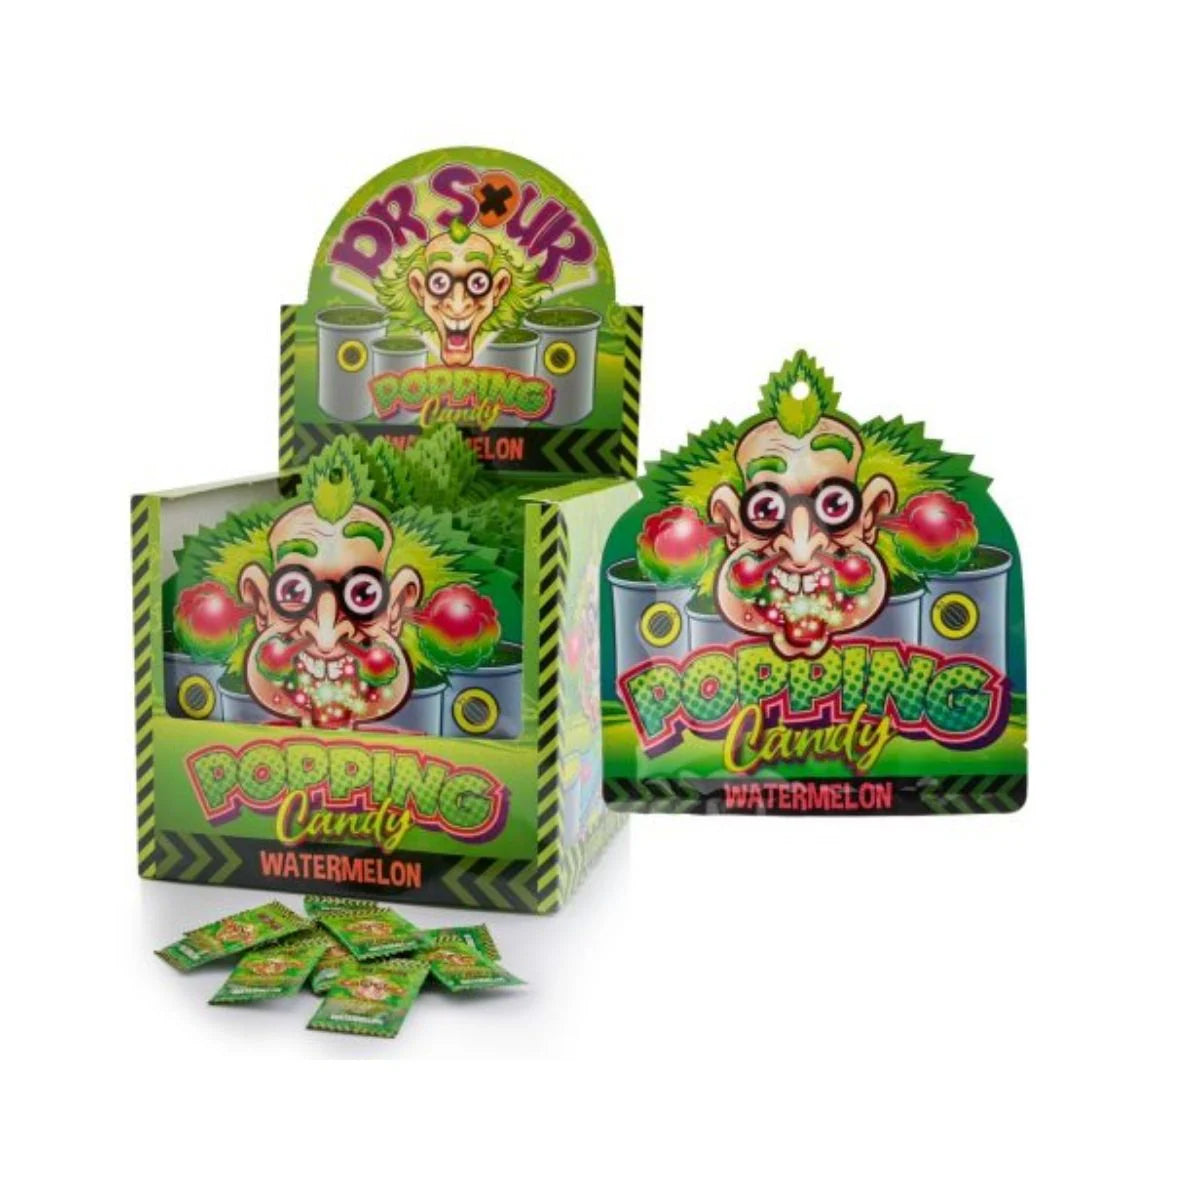 Dr Sour Popping Candy Watermelon - 15g